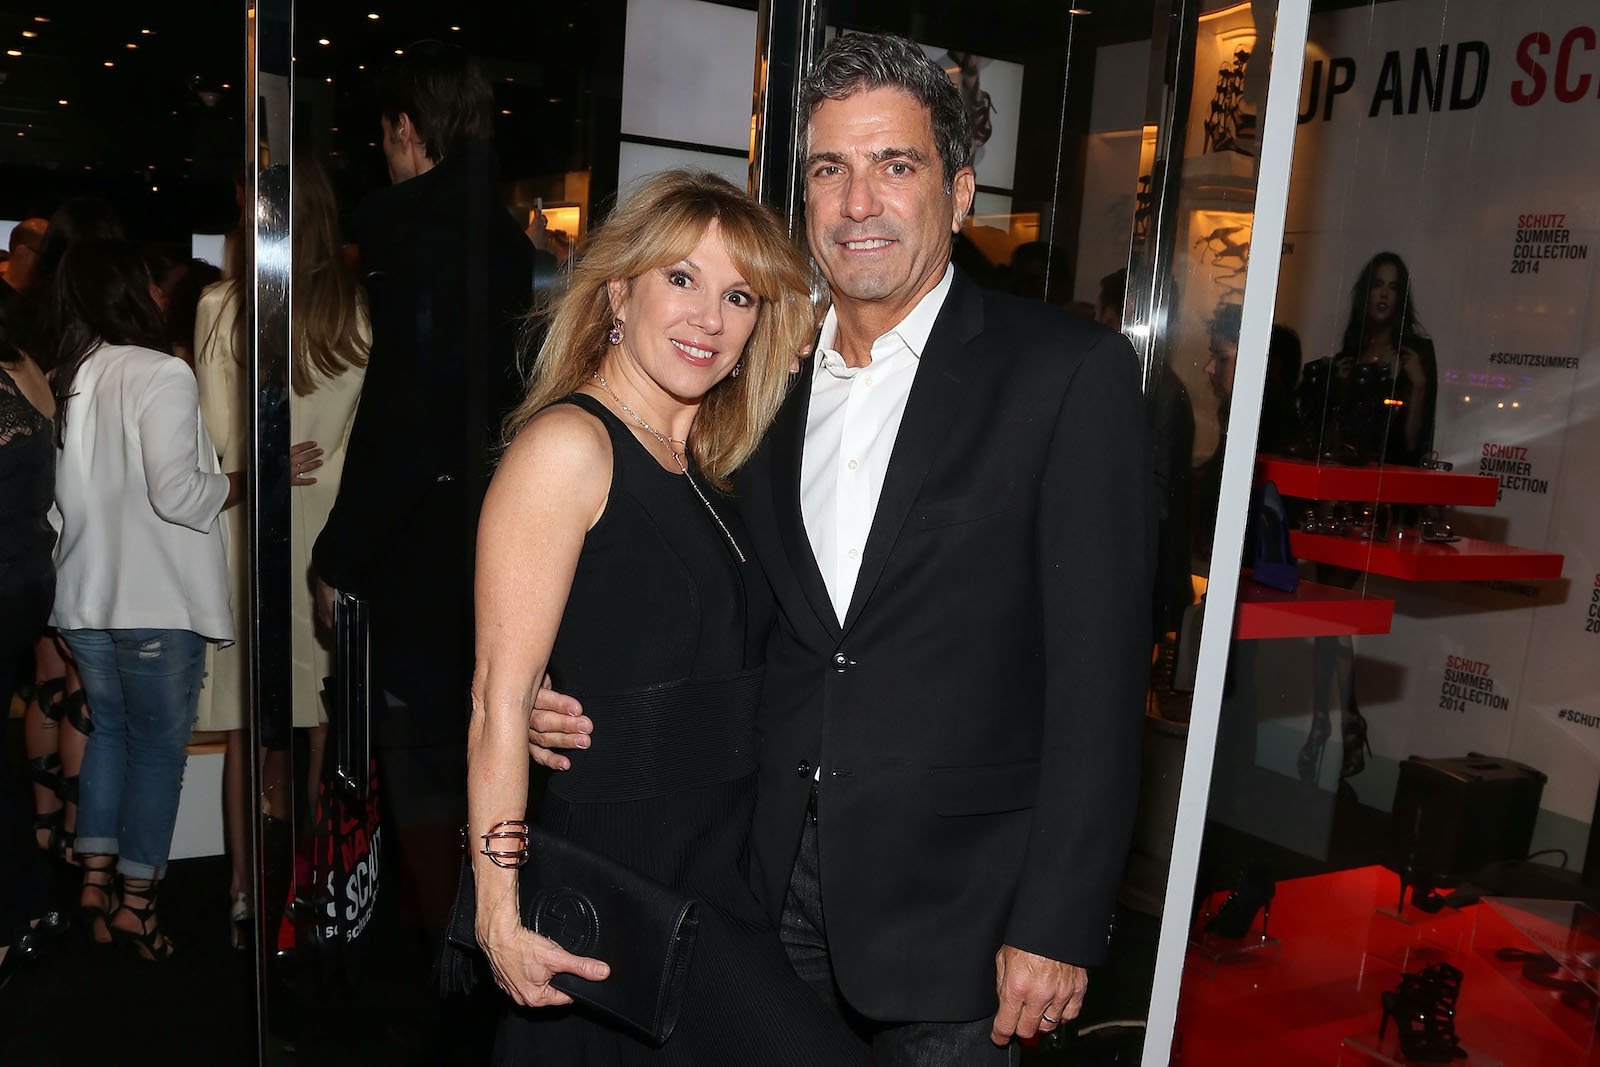 Ramona Singer from 'RHONY' stands next to Mario Singer and he has his arm around her waist